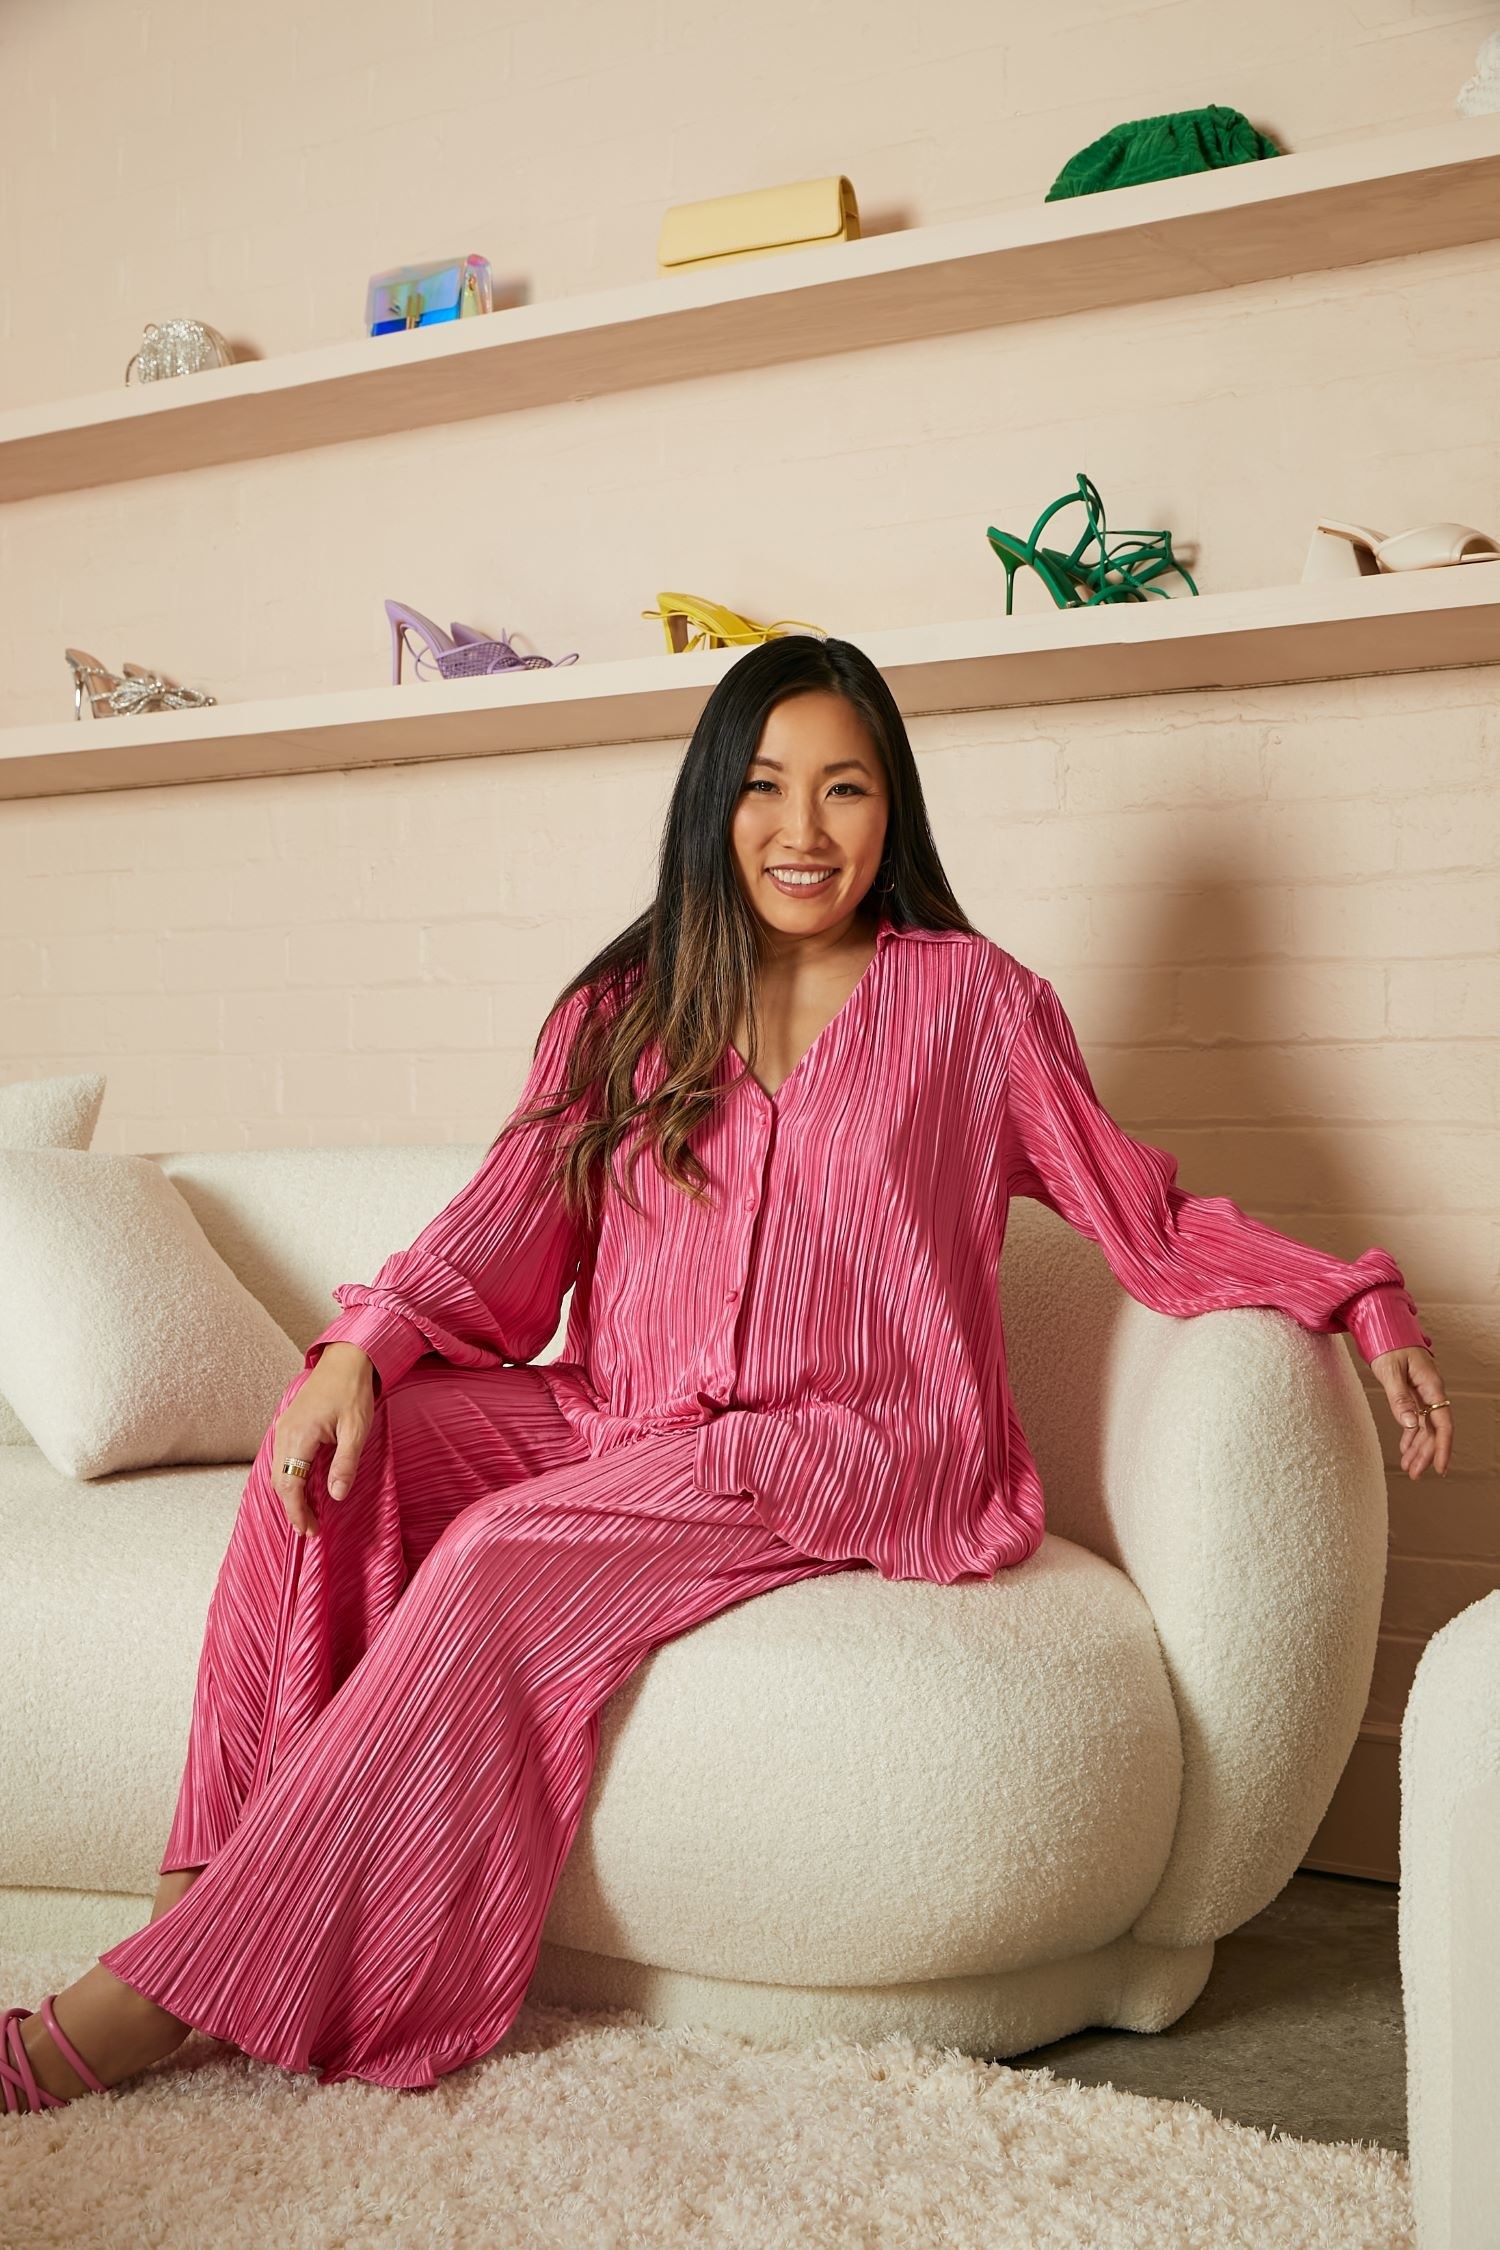 Smiling Jane Lu sits on a couch in a pink outfit